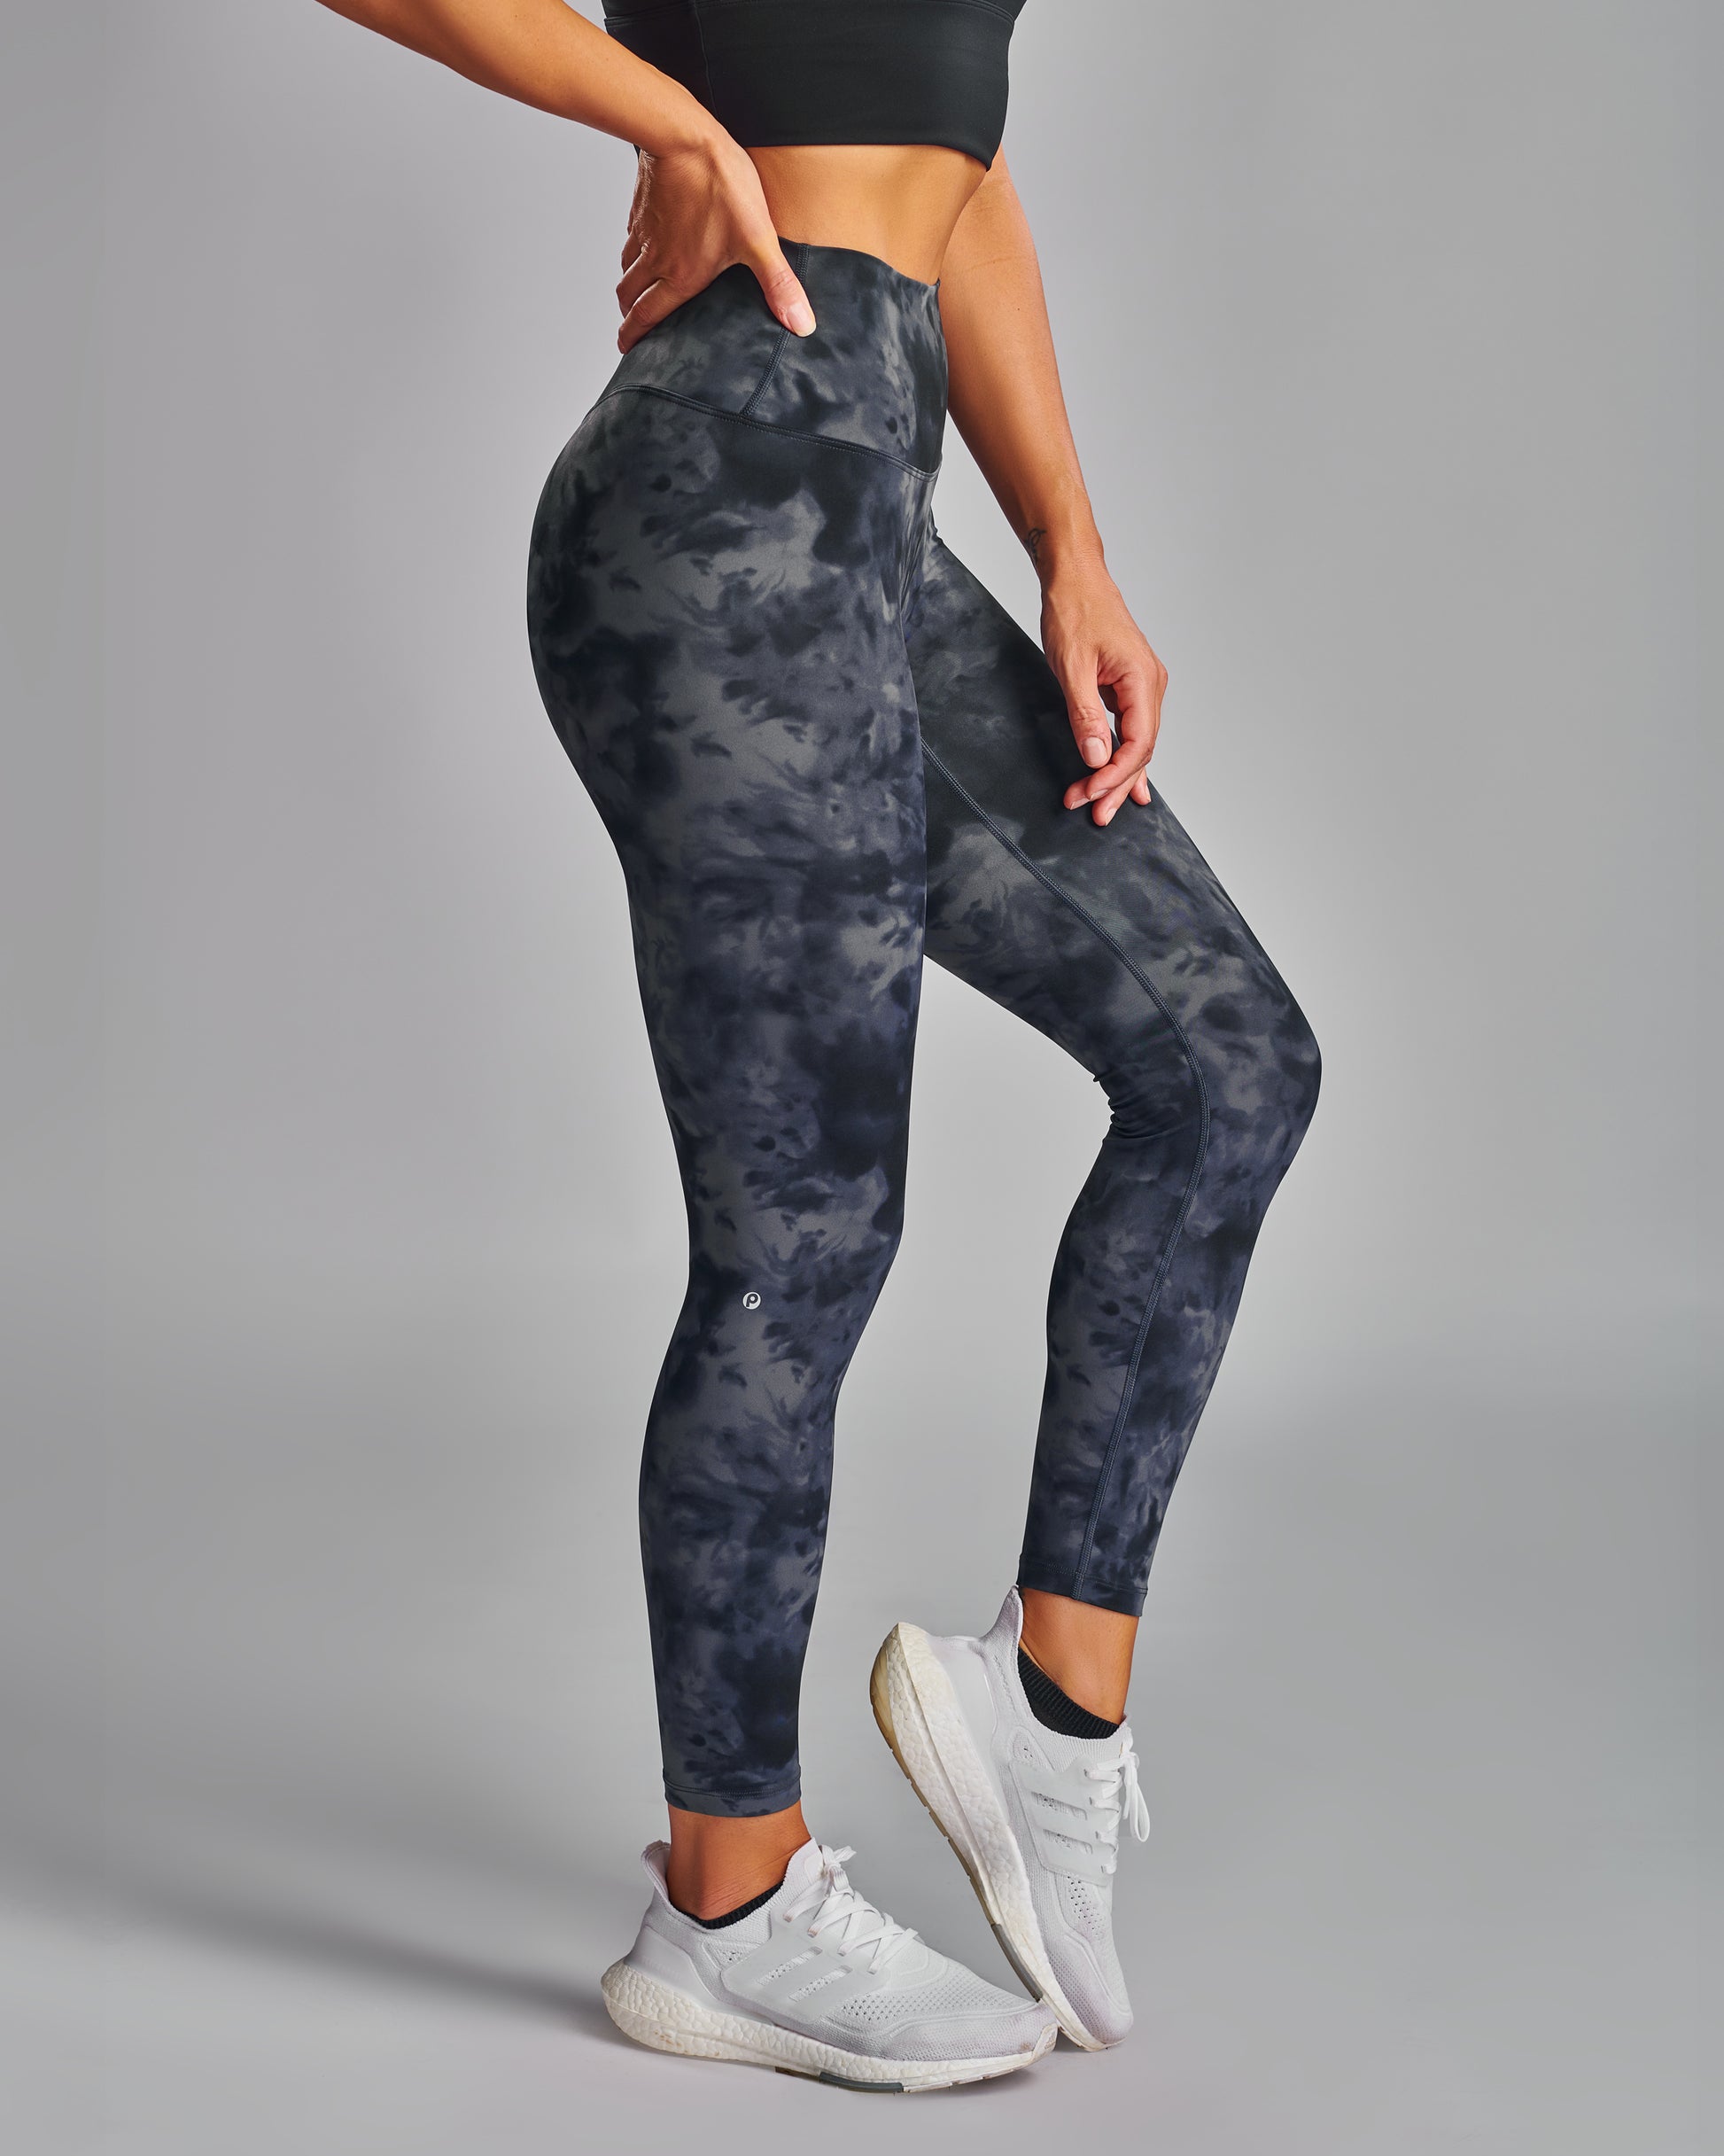 Bootylicious – Pineapple Athleisure